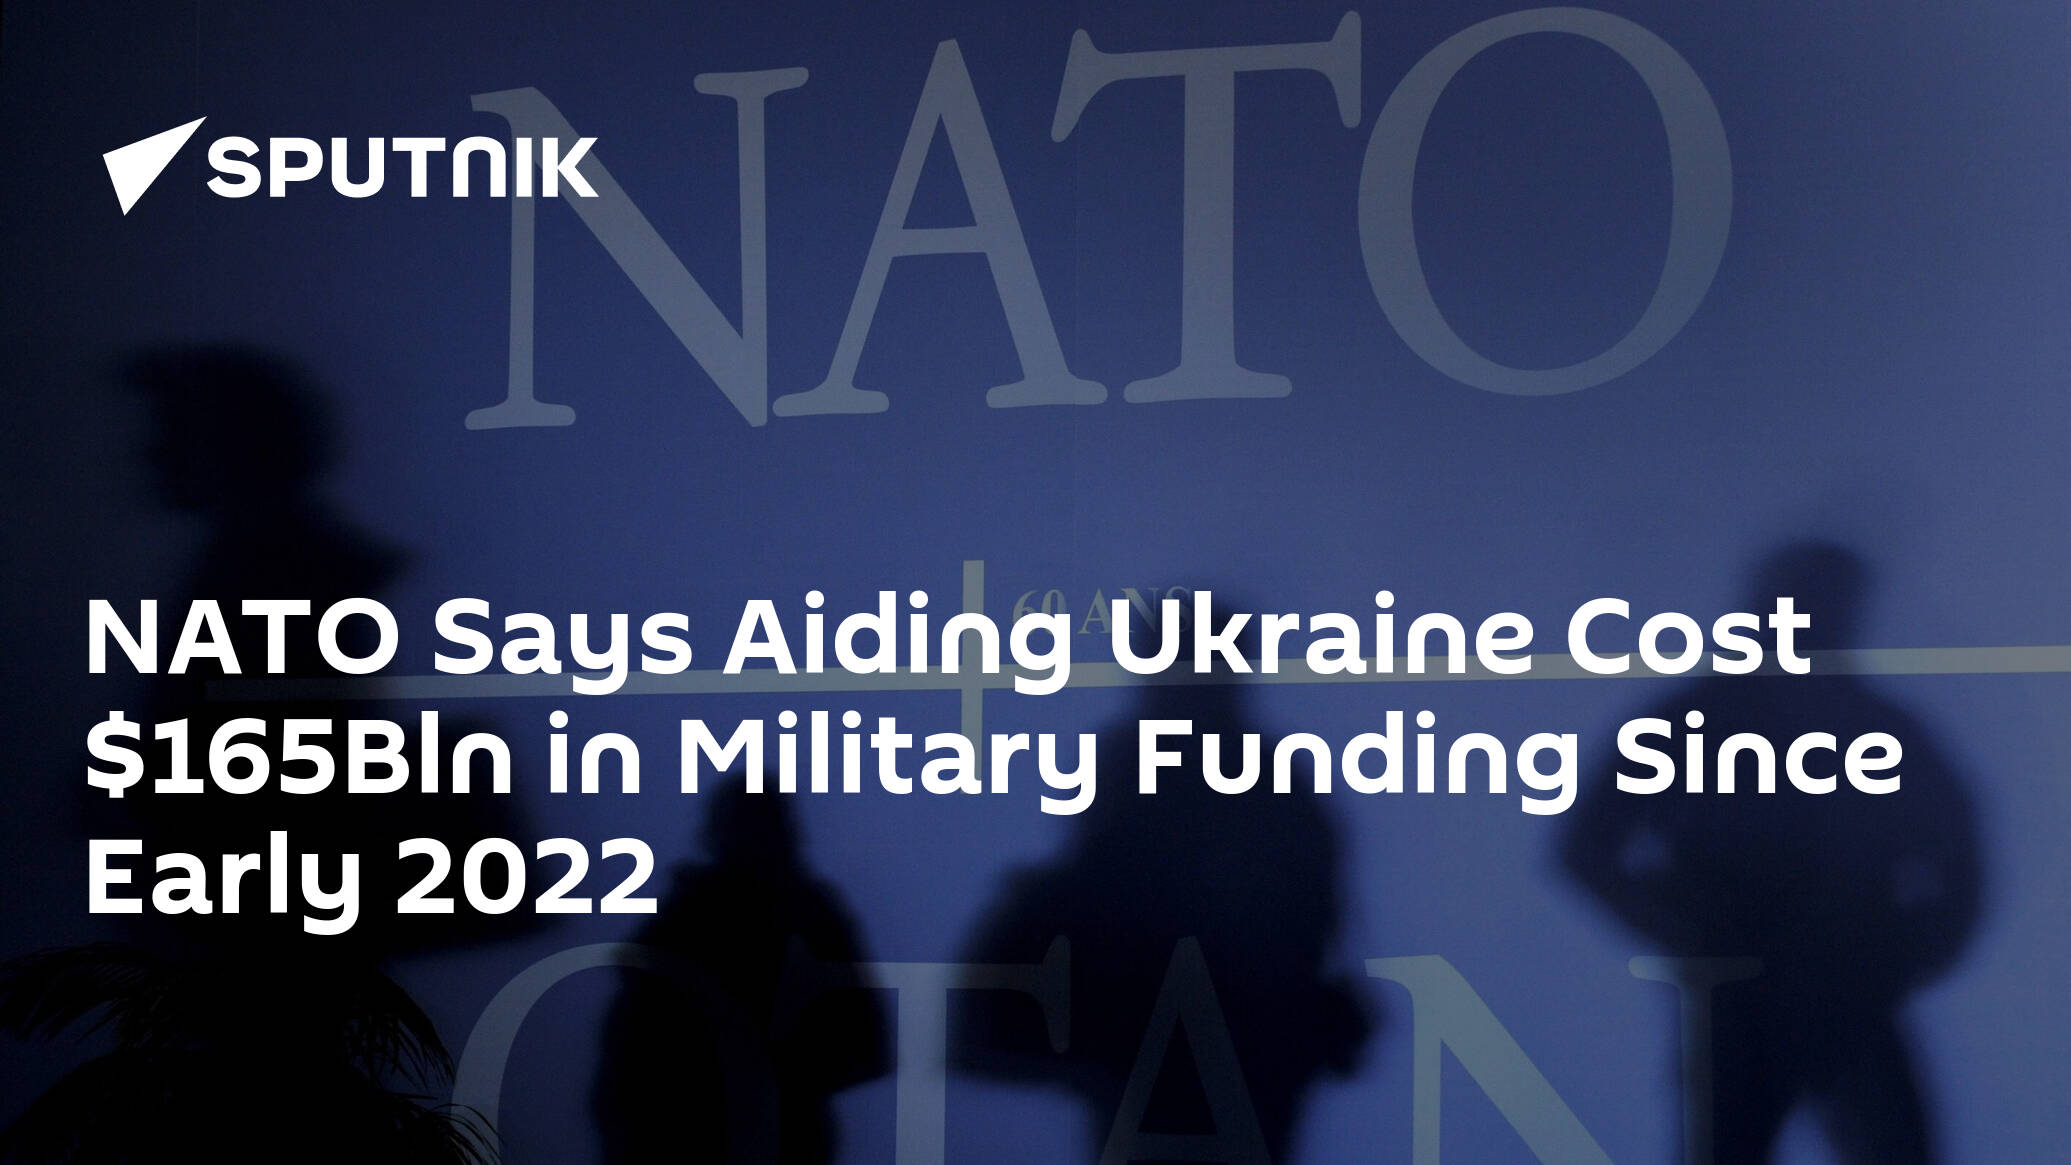 NATO Says Aiding Ukraine Cost 5Bln in Military Funding Since Early 2022